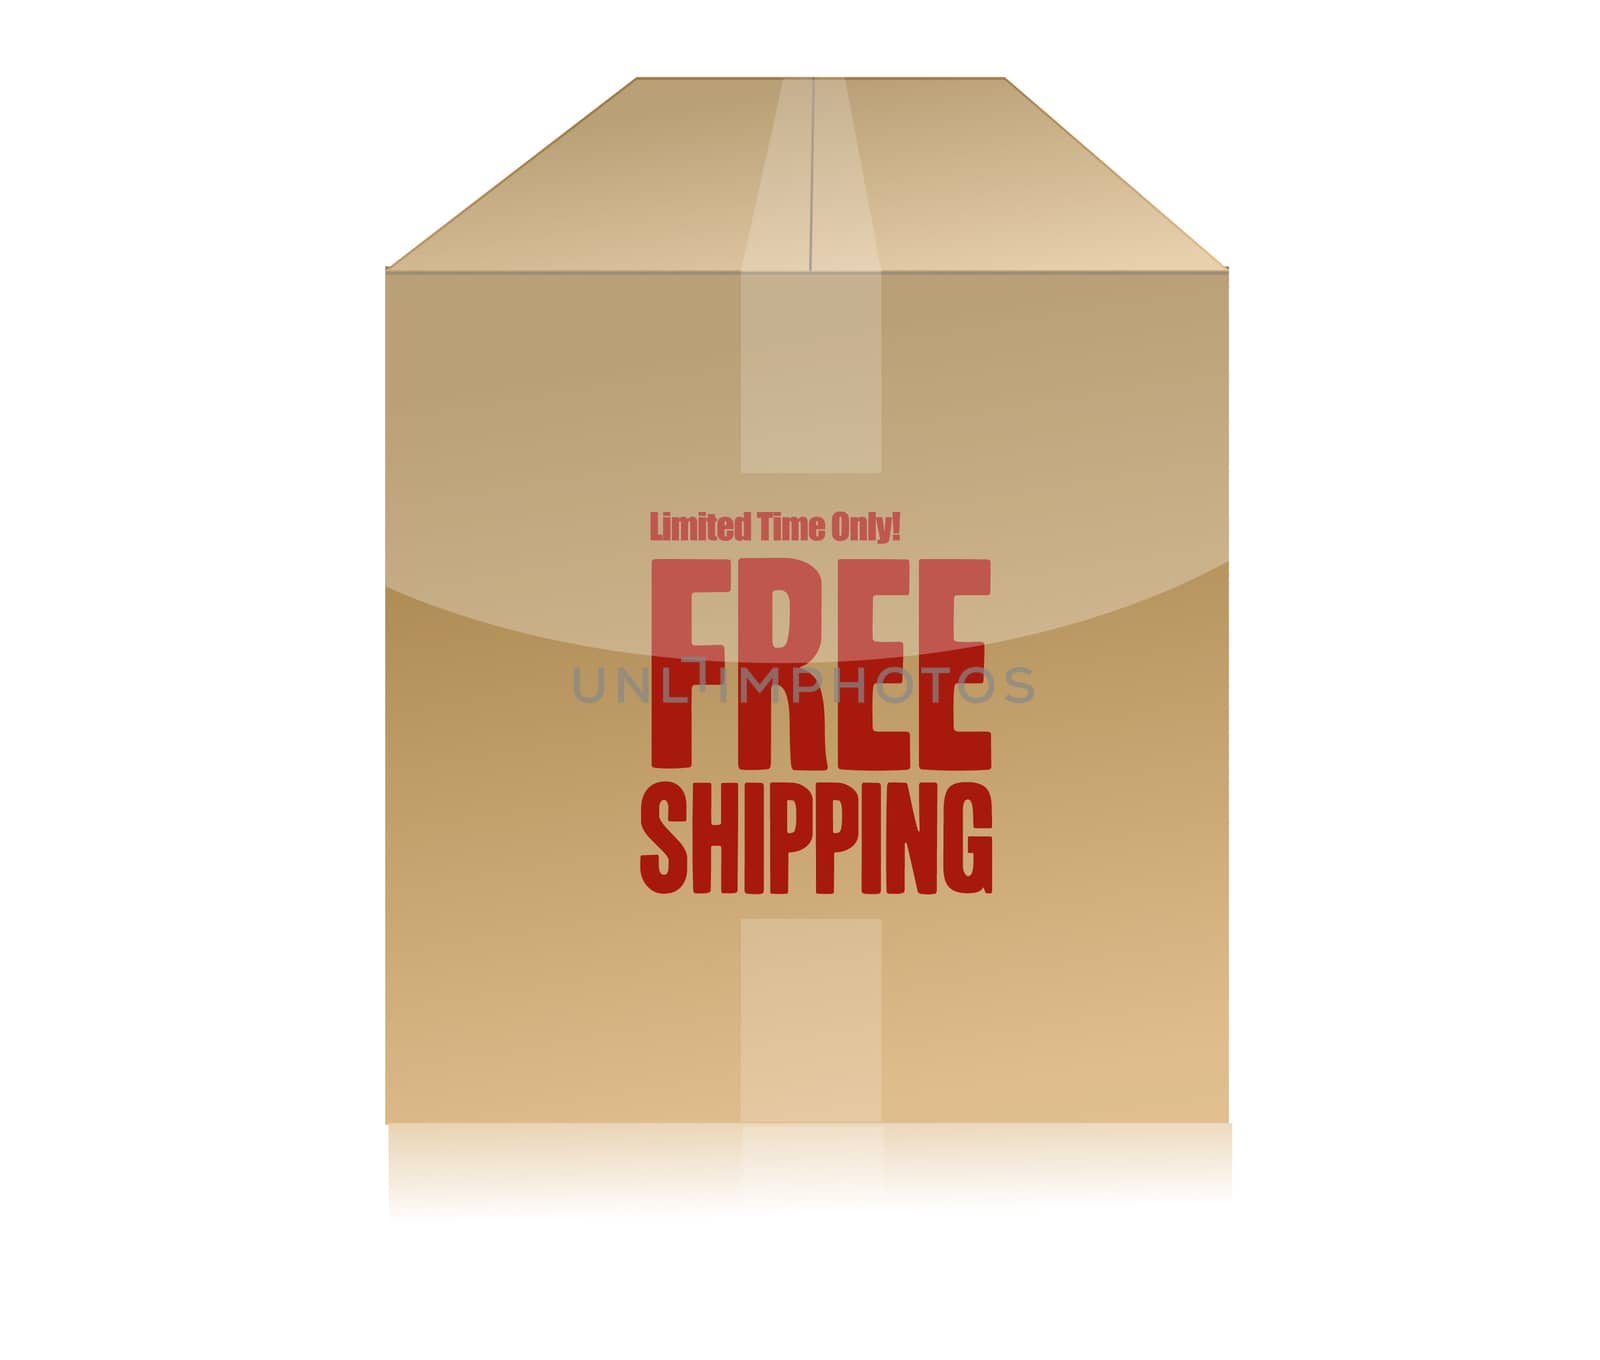 free shipping box illustration design isolated over a white back by alexmillos